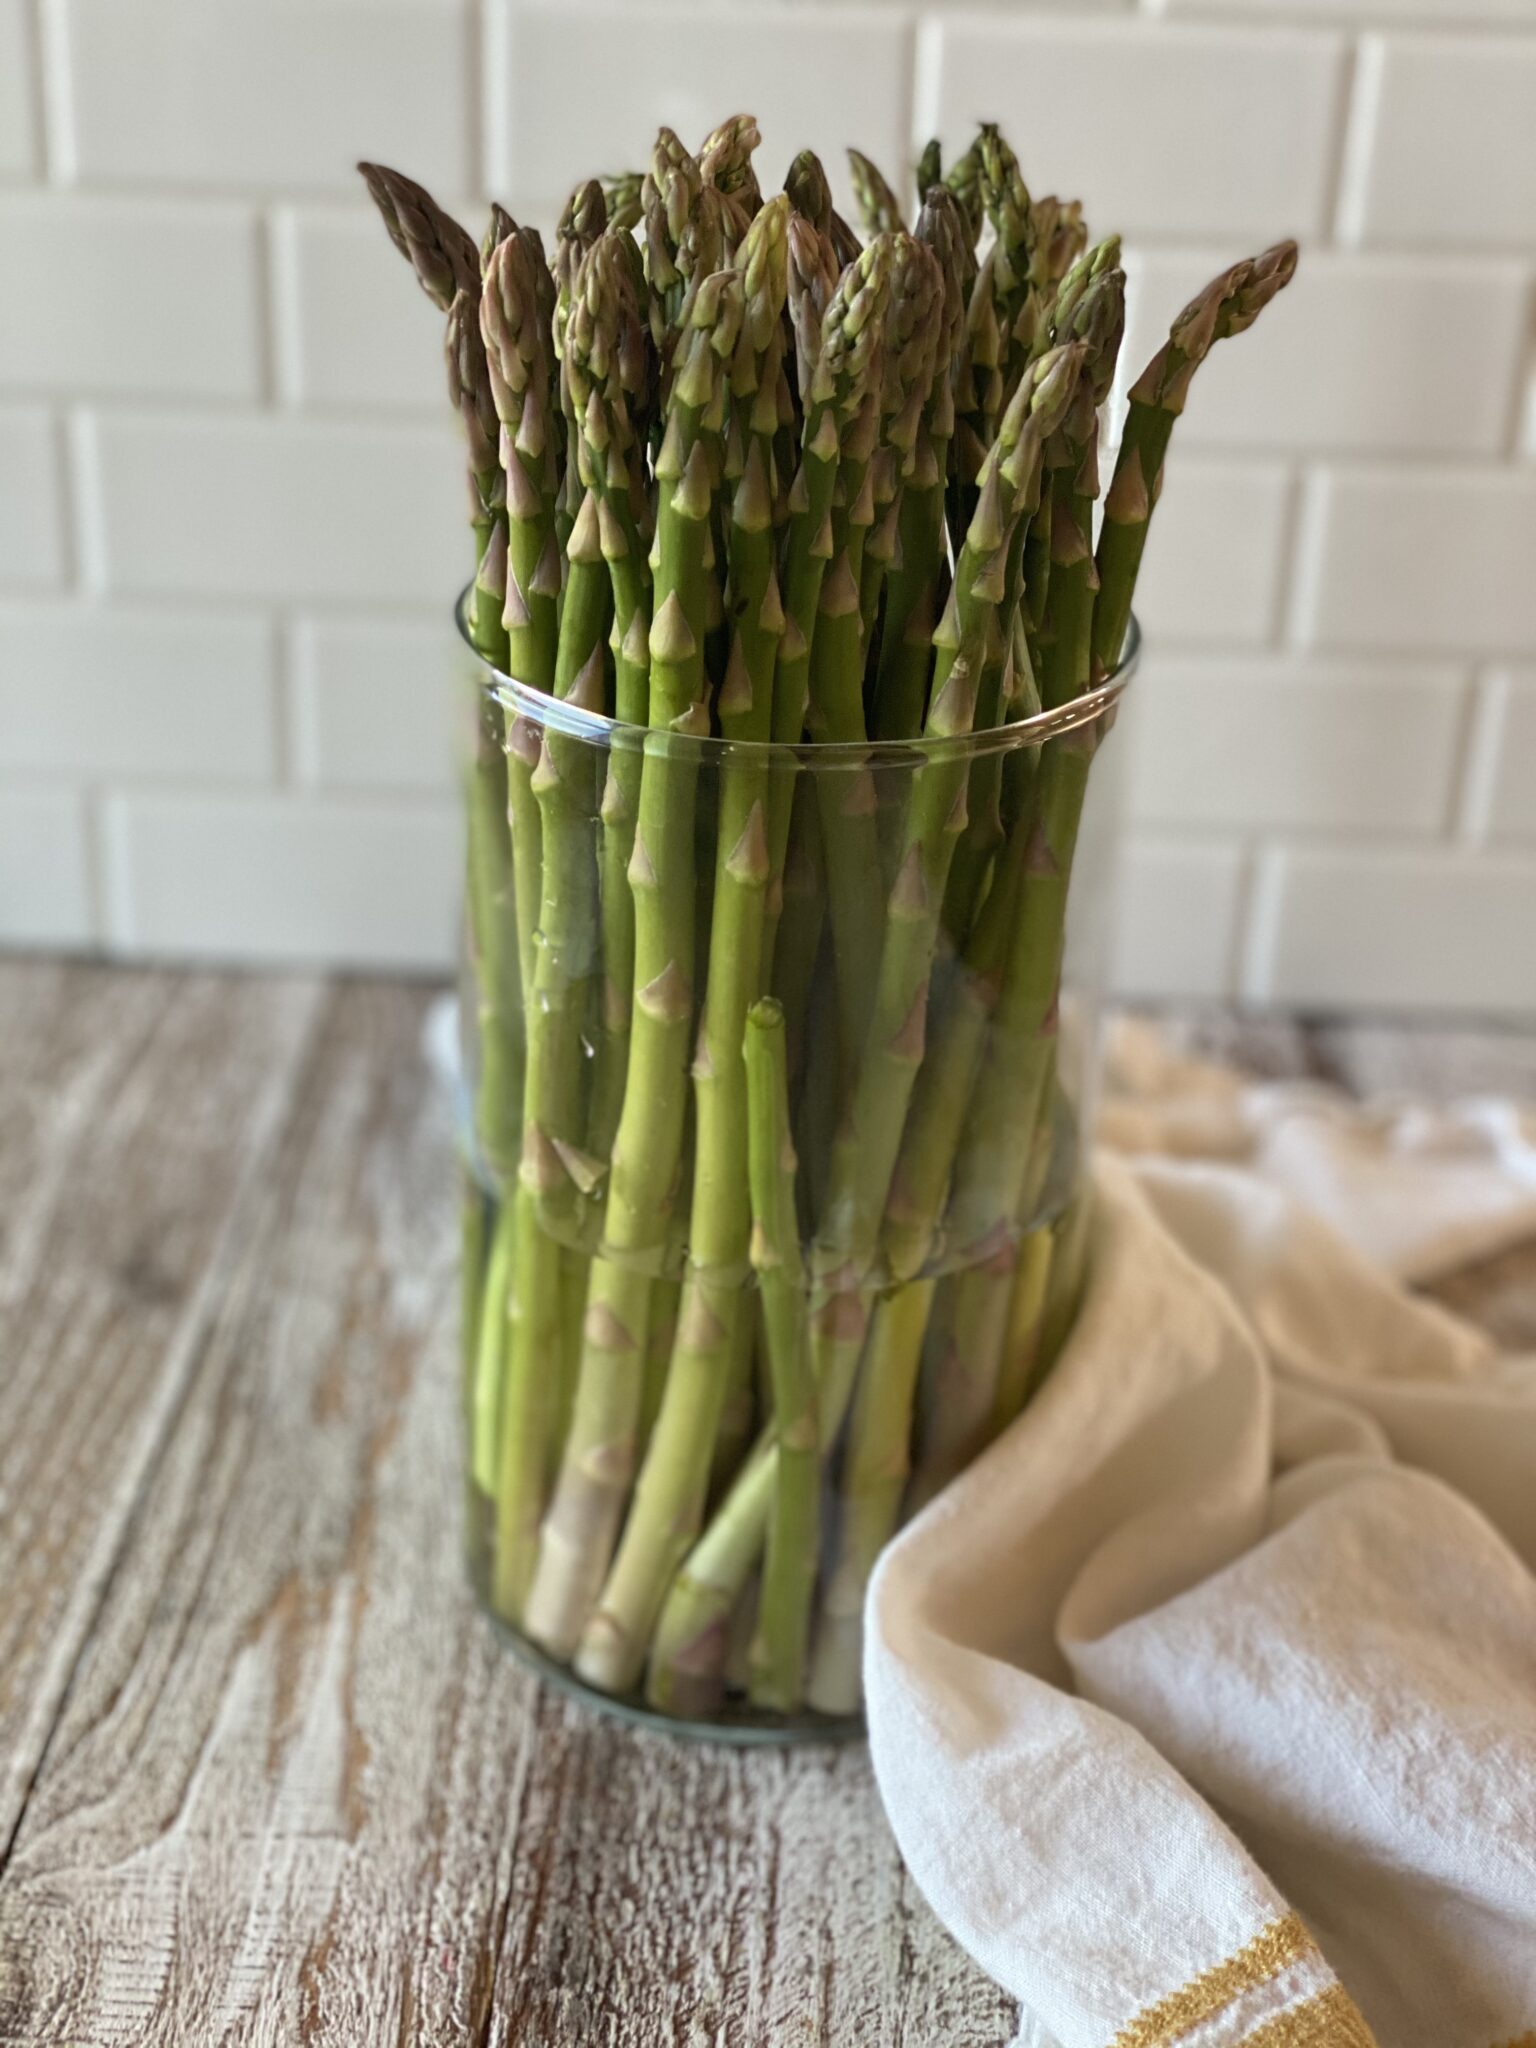 asparagus in a glass with water